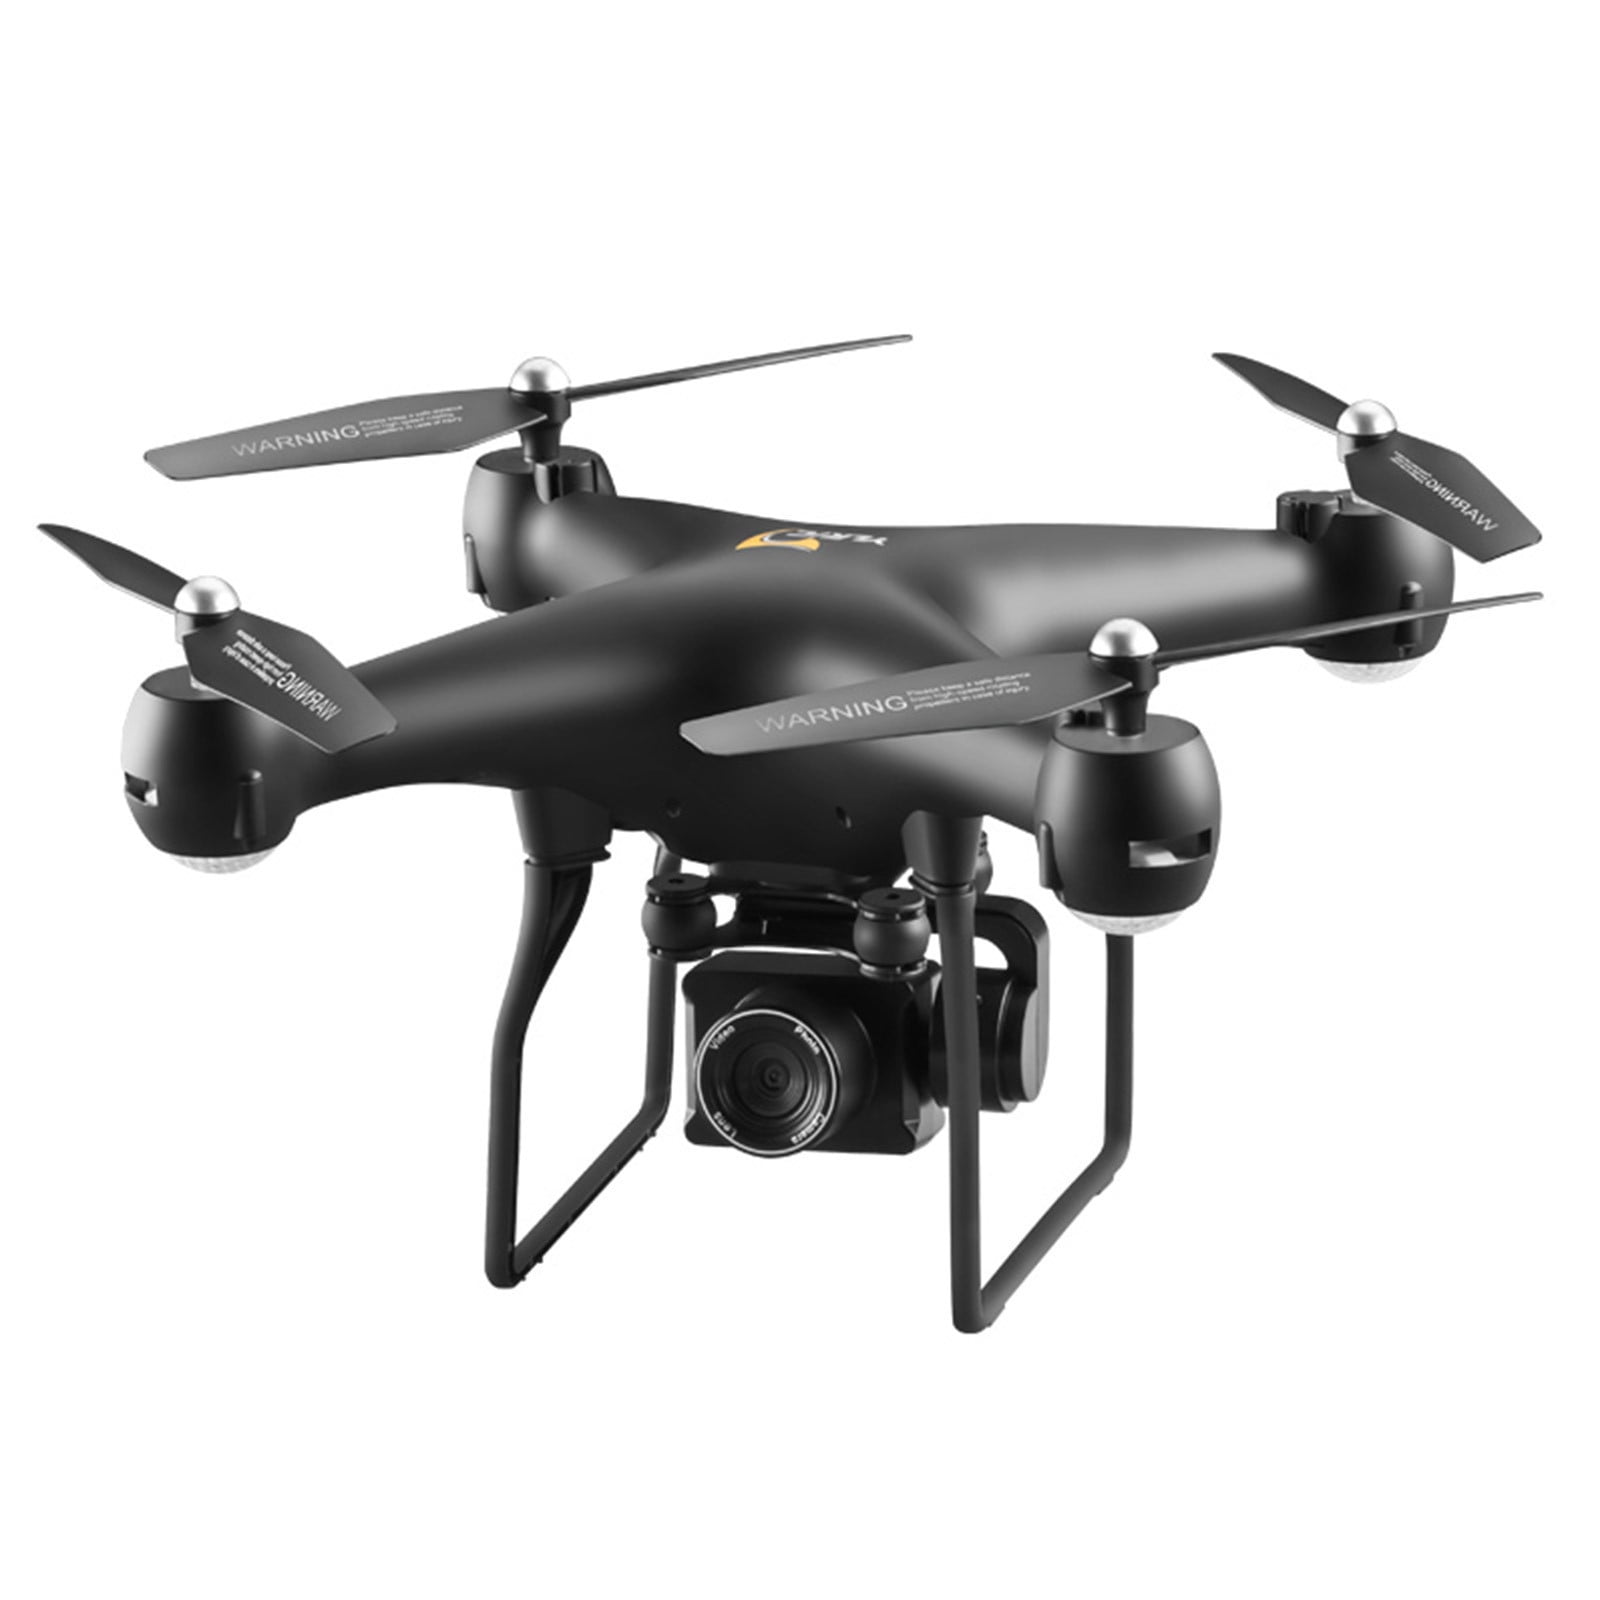 Yyeselk S32T Drones with Camera for Adults, All-Round Led Lighting,  Brushless Motor, Auto-Return, One-Button Auto Return, Altitude Hold Mode,  Wifi Fpv For boys and Girls(Black-720P Camera Drone) 